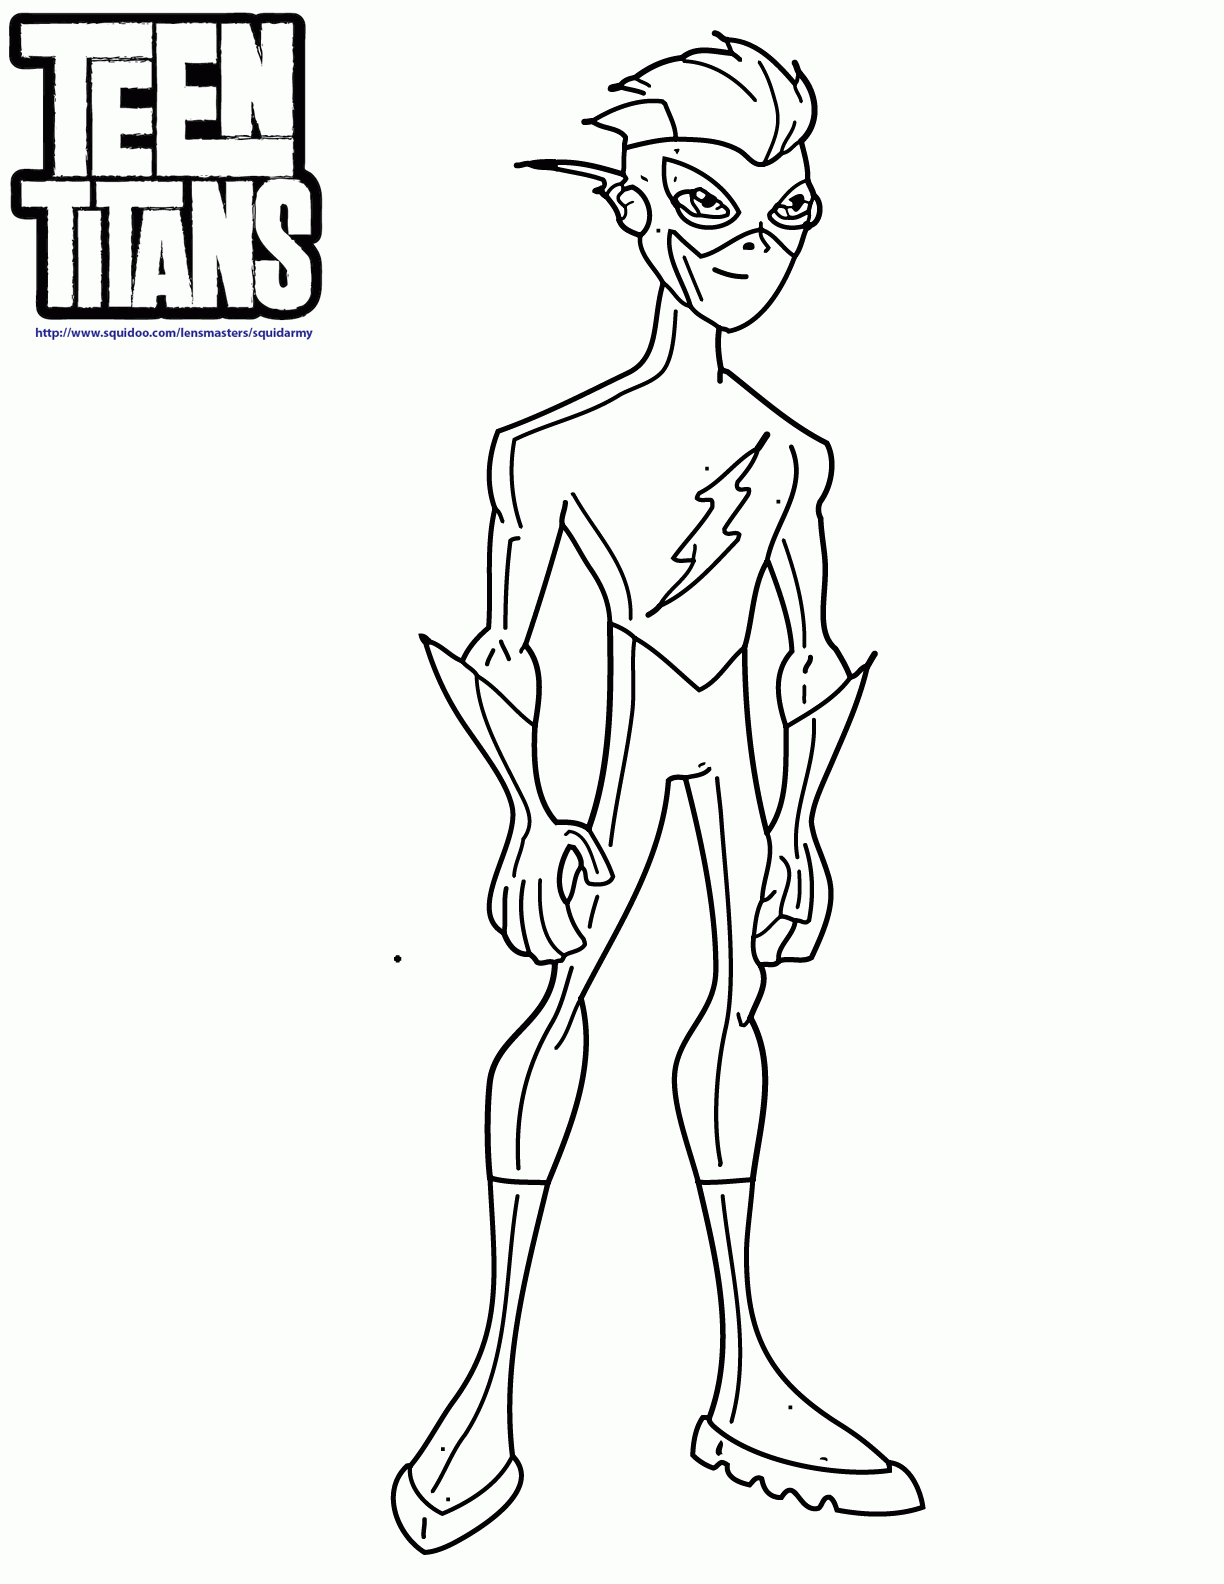 6 Pics of Speedy Teen Titans Coloring Pages - Flash Teen Titans Go ...